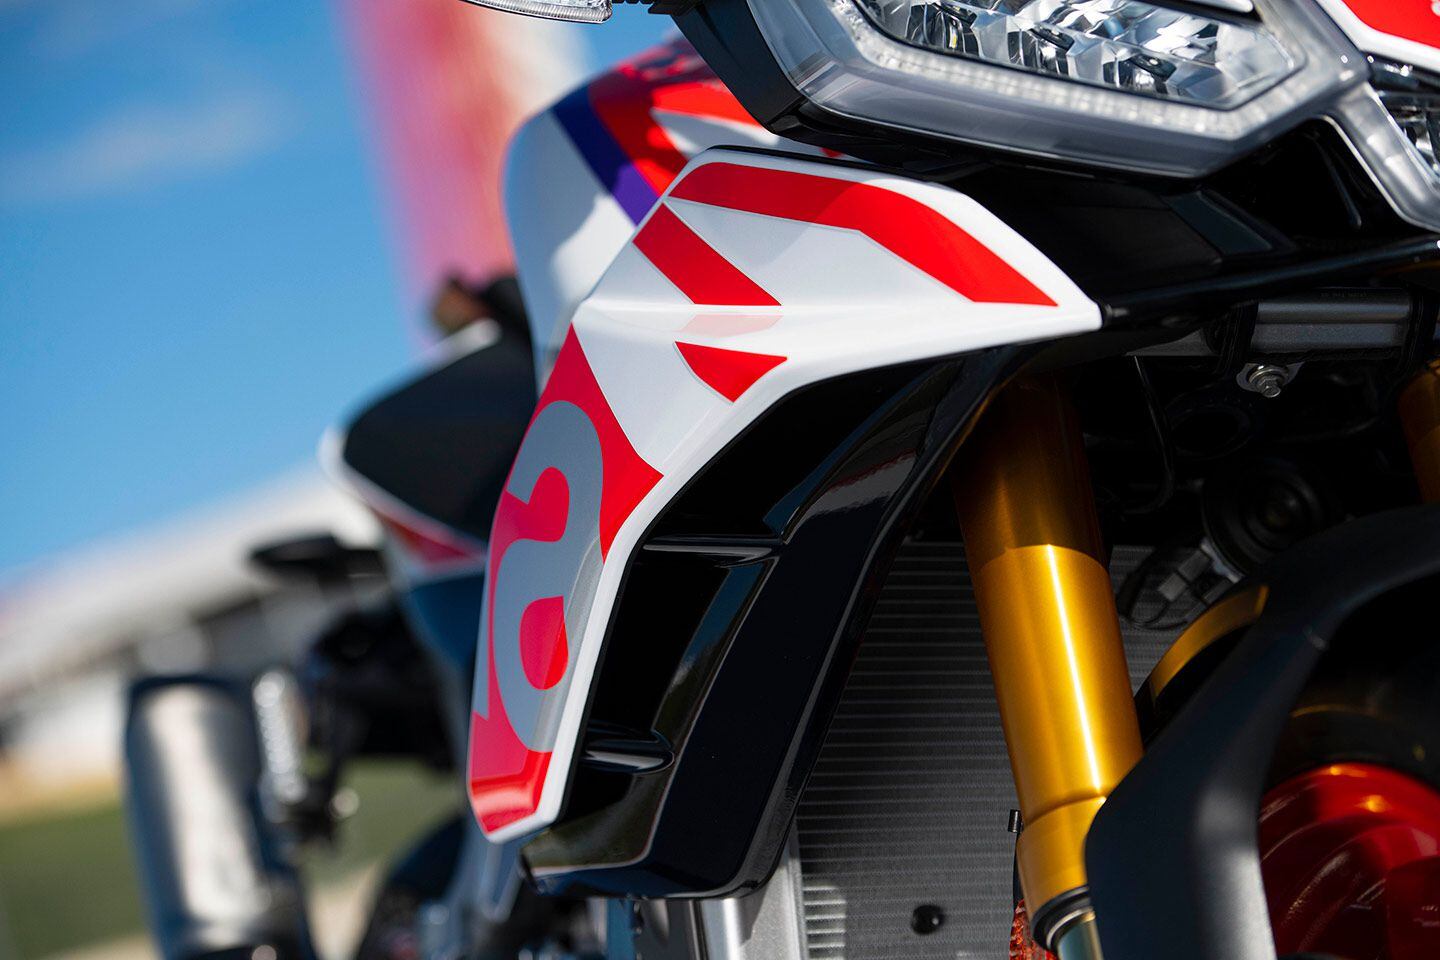 Similarly, the revised fairing and bodywork of the Aprilia Tuono V4 Factory Special Edition, said to improve airbox pressure.